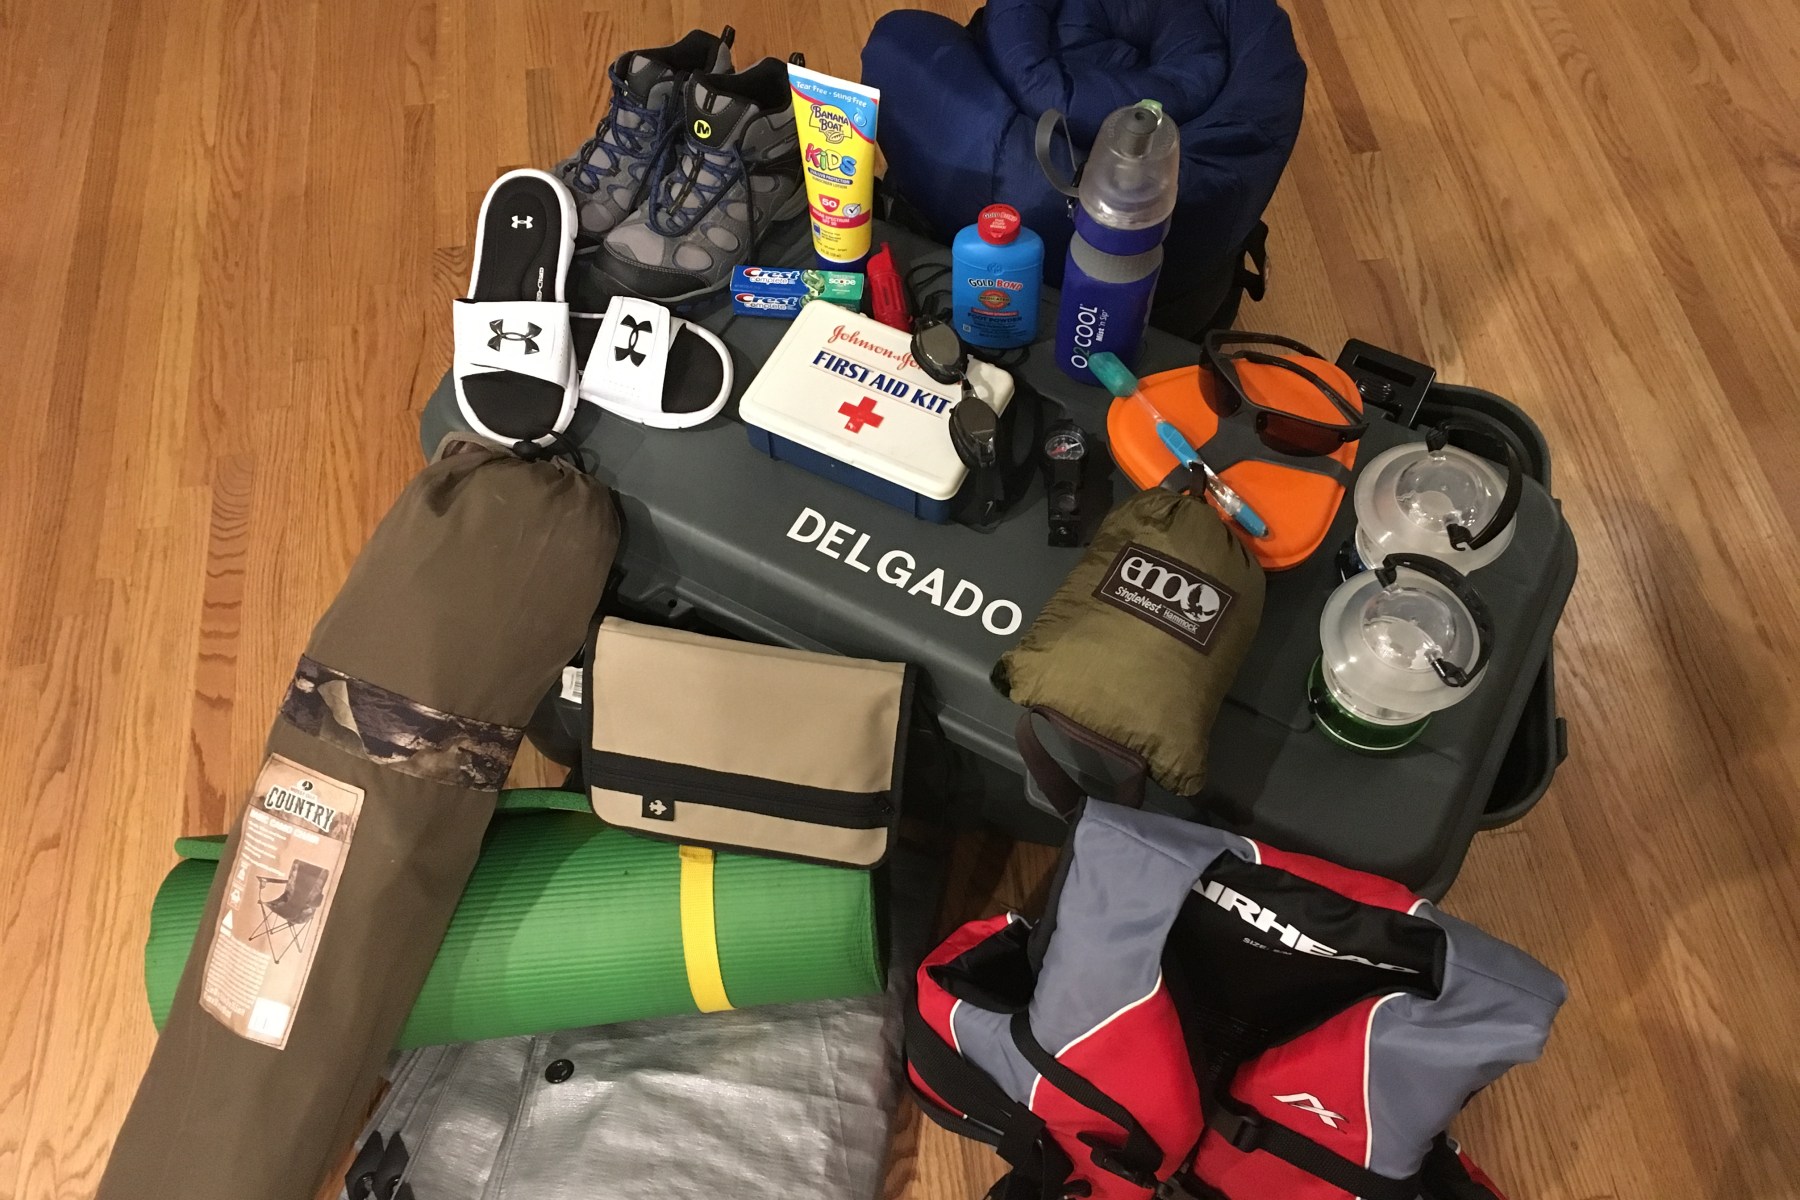 Hiking boots, sunscreen bottle, toothpaste, whistle, first aid kit, goggles, compass, mess kit, toothbrush, hammock, lanterns, sleeping bag, foot powder bottle, flip flops, nylon book cover, camp chair, sleeping pad, tarp, life preserver, foot locker.